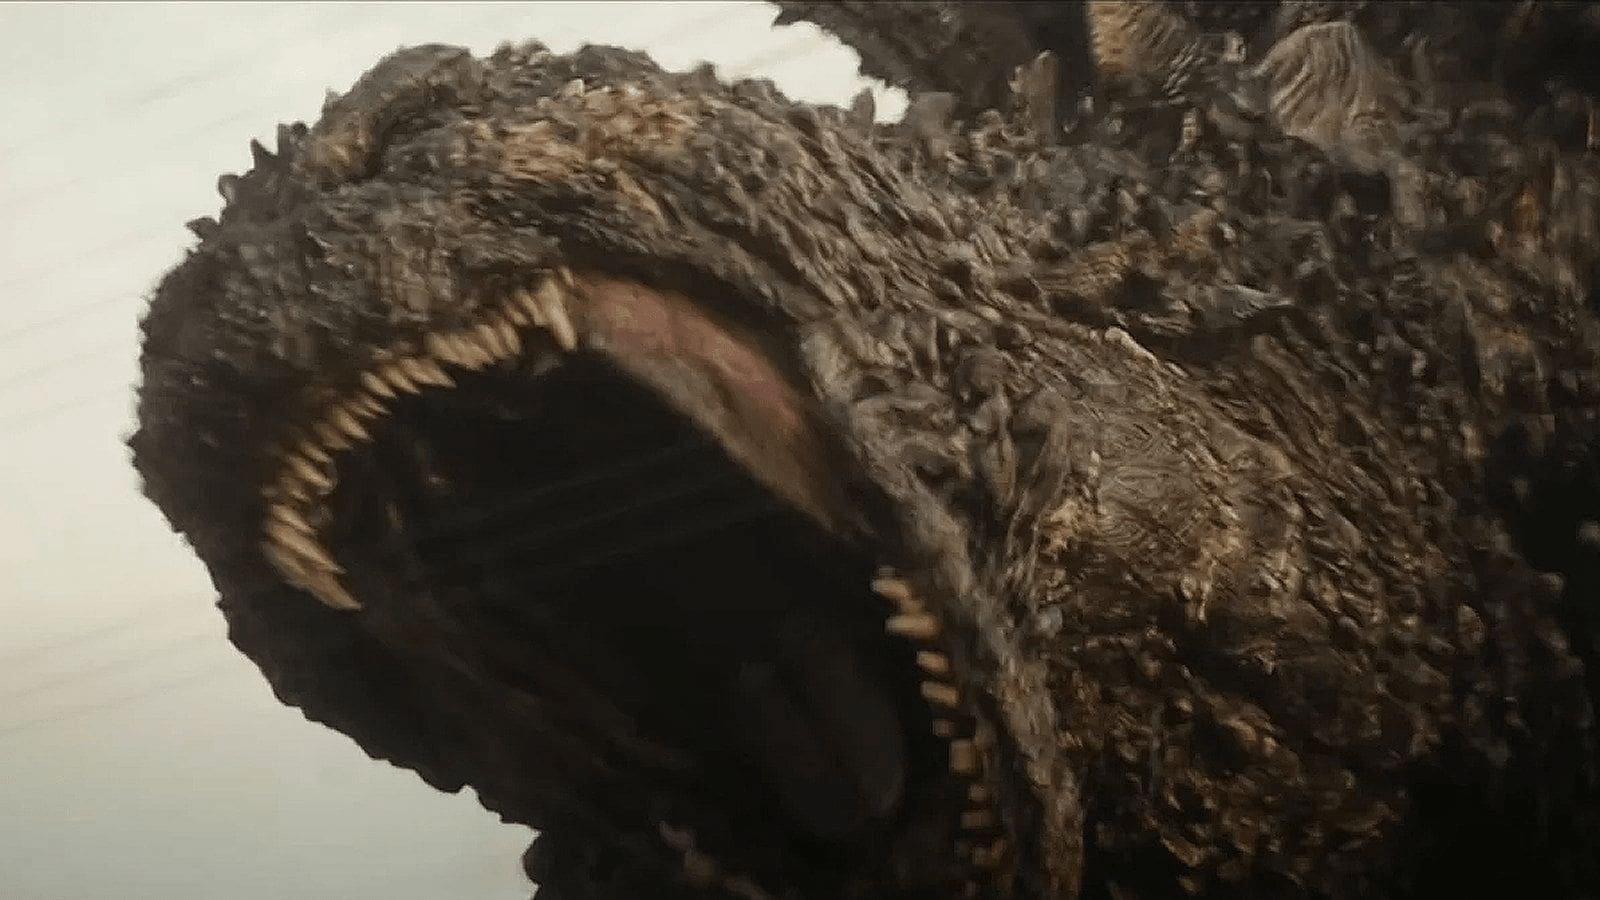 Why Godzilla Minus One Ended After Season 5 (The Inside Scoop)